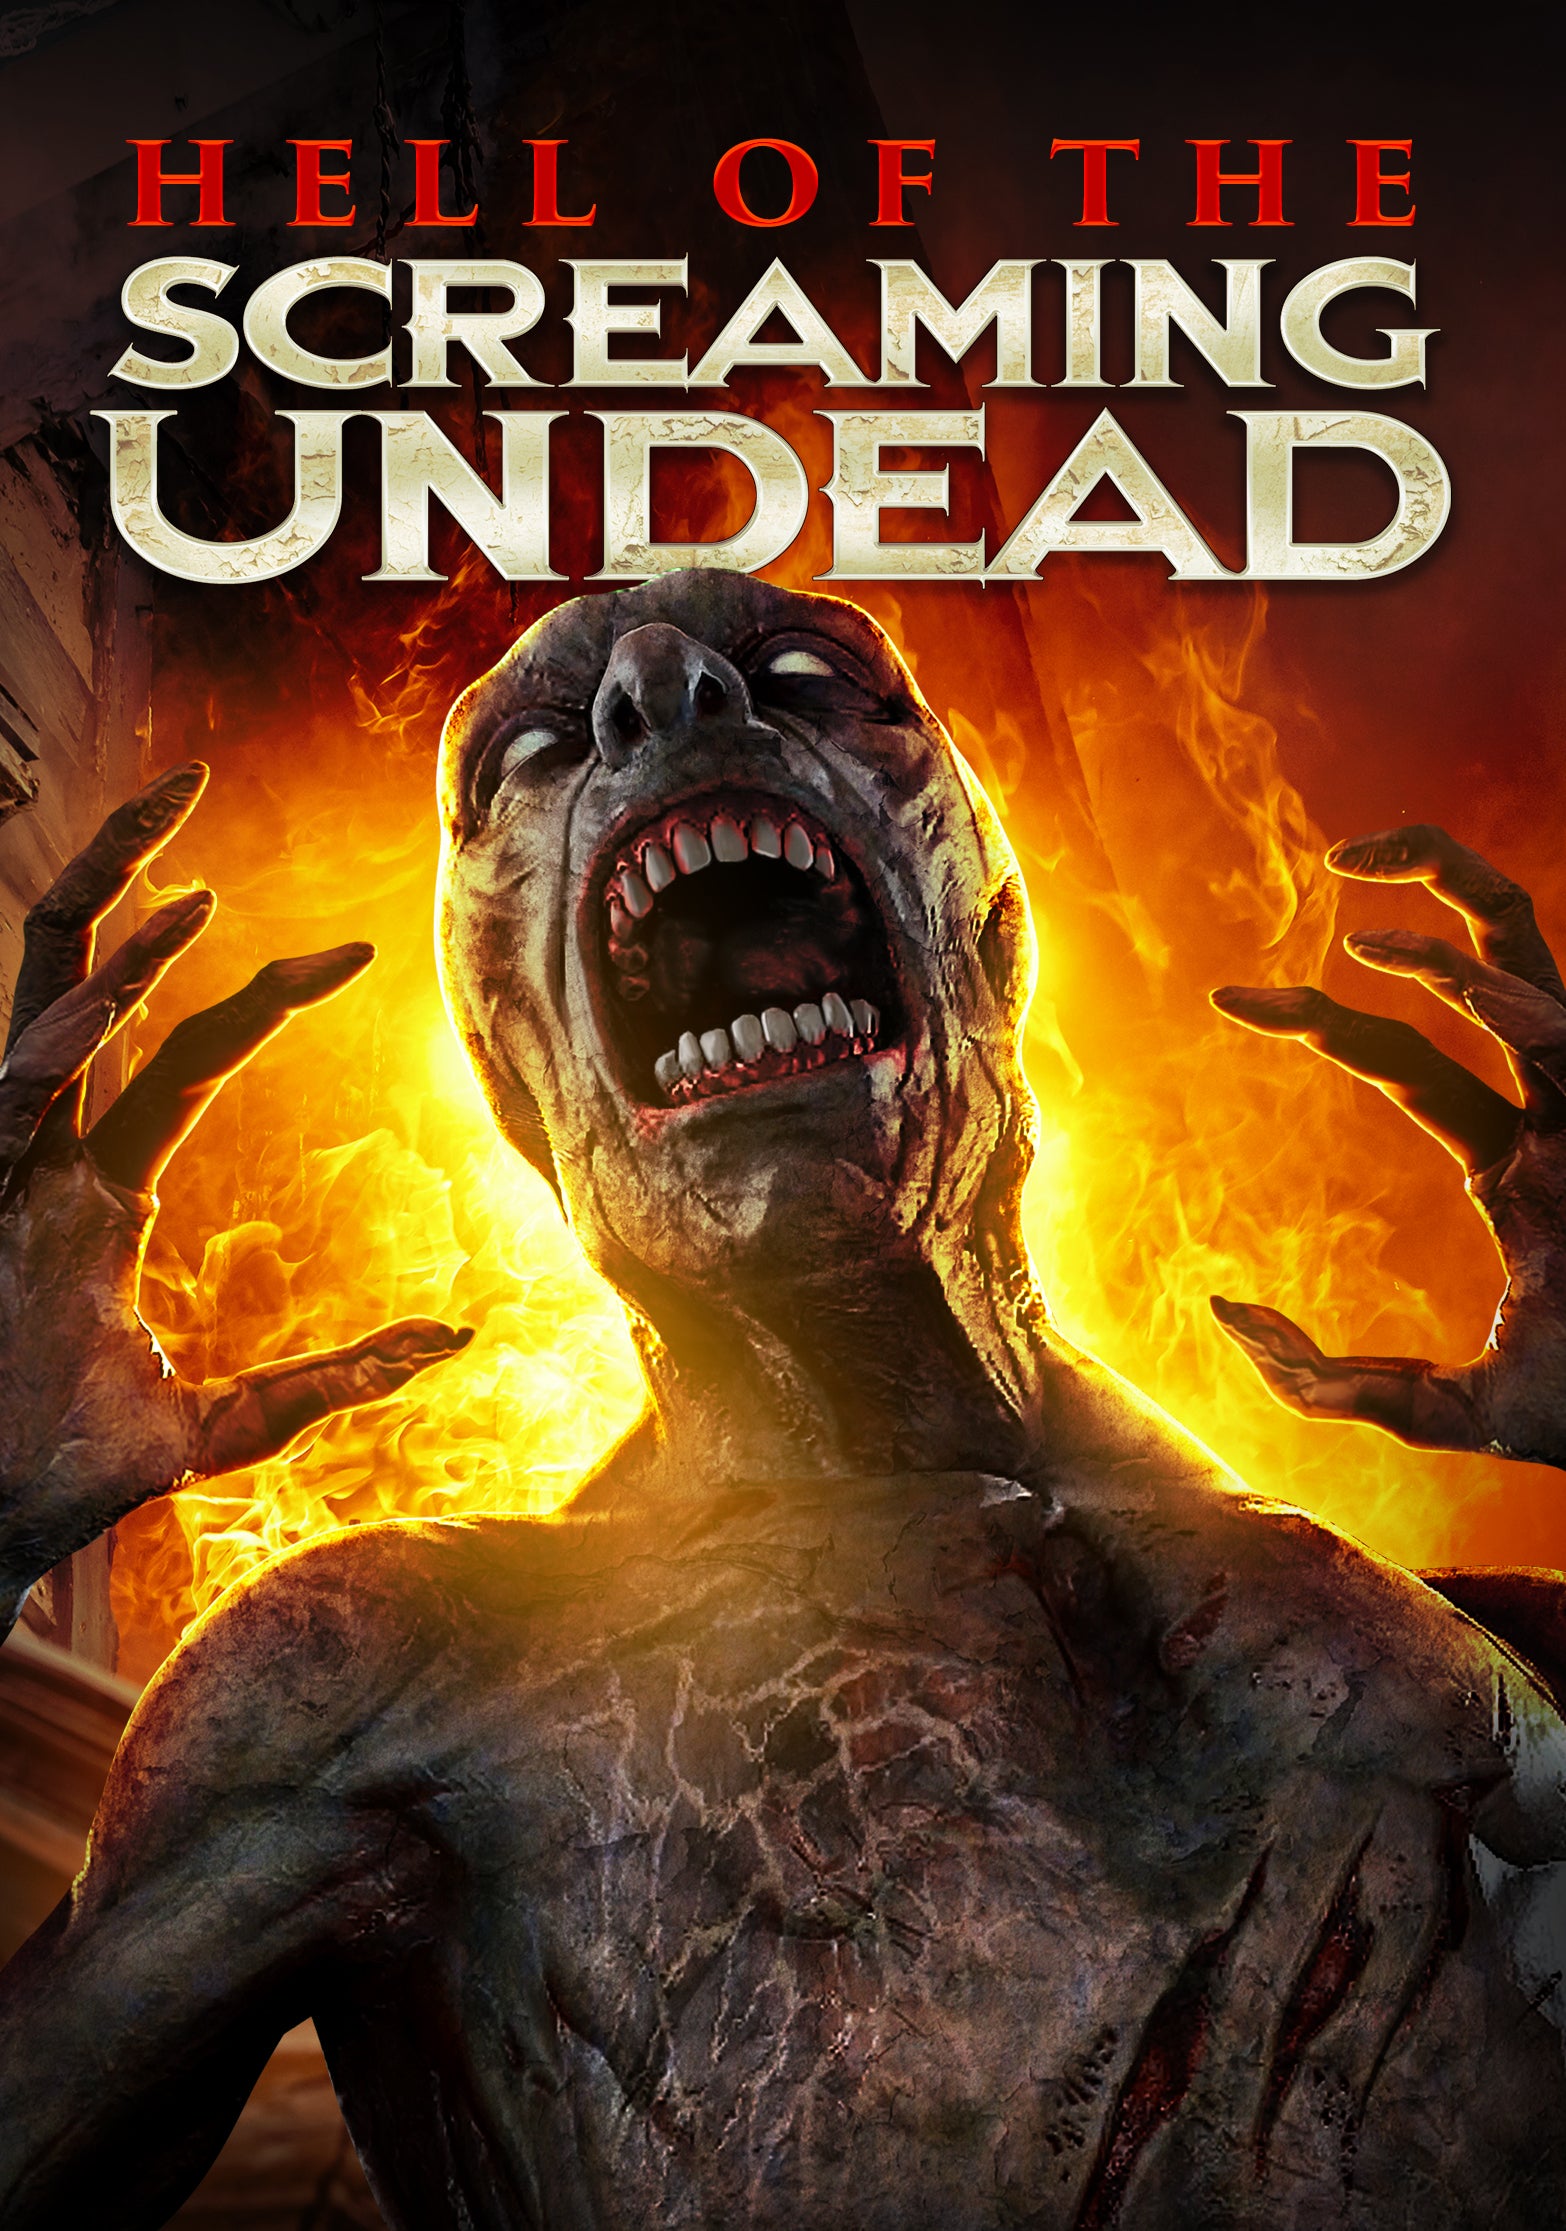 HELL OF THE SCREAMING UNDEAD DVD